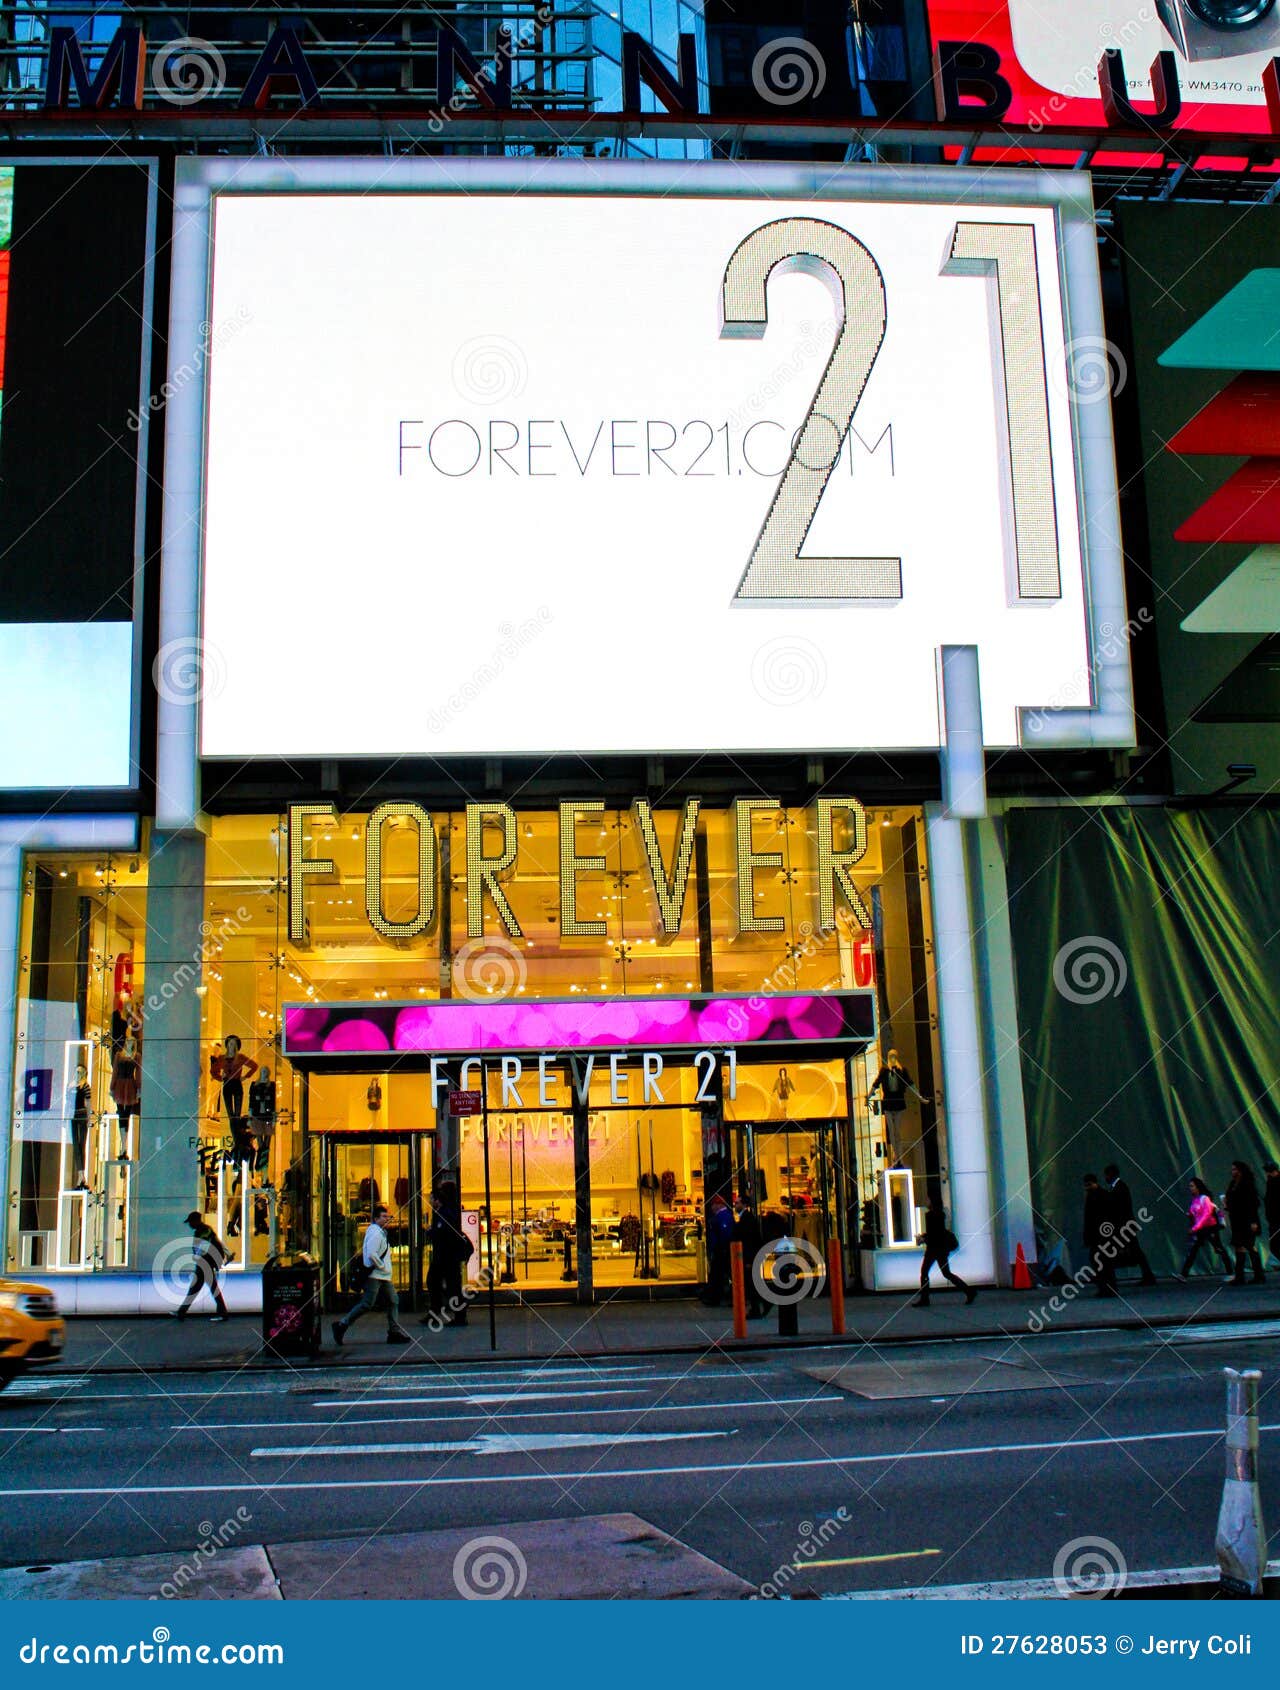 The Forever 21 retail store located at Times Square, Manhattan, NYC.